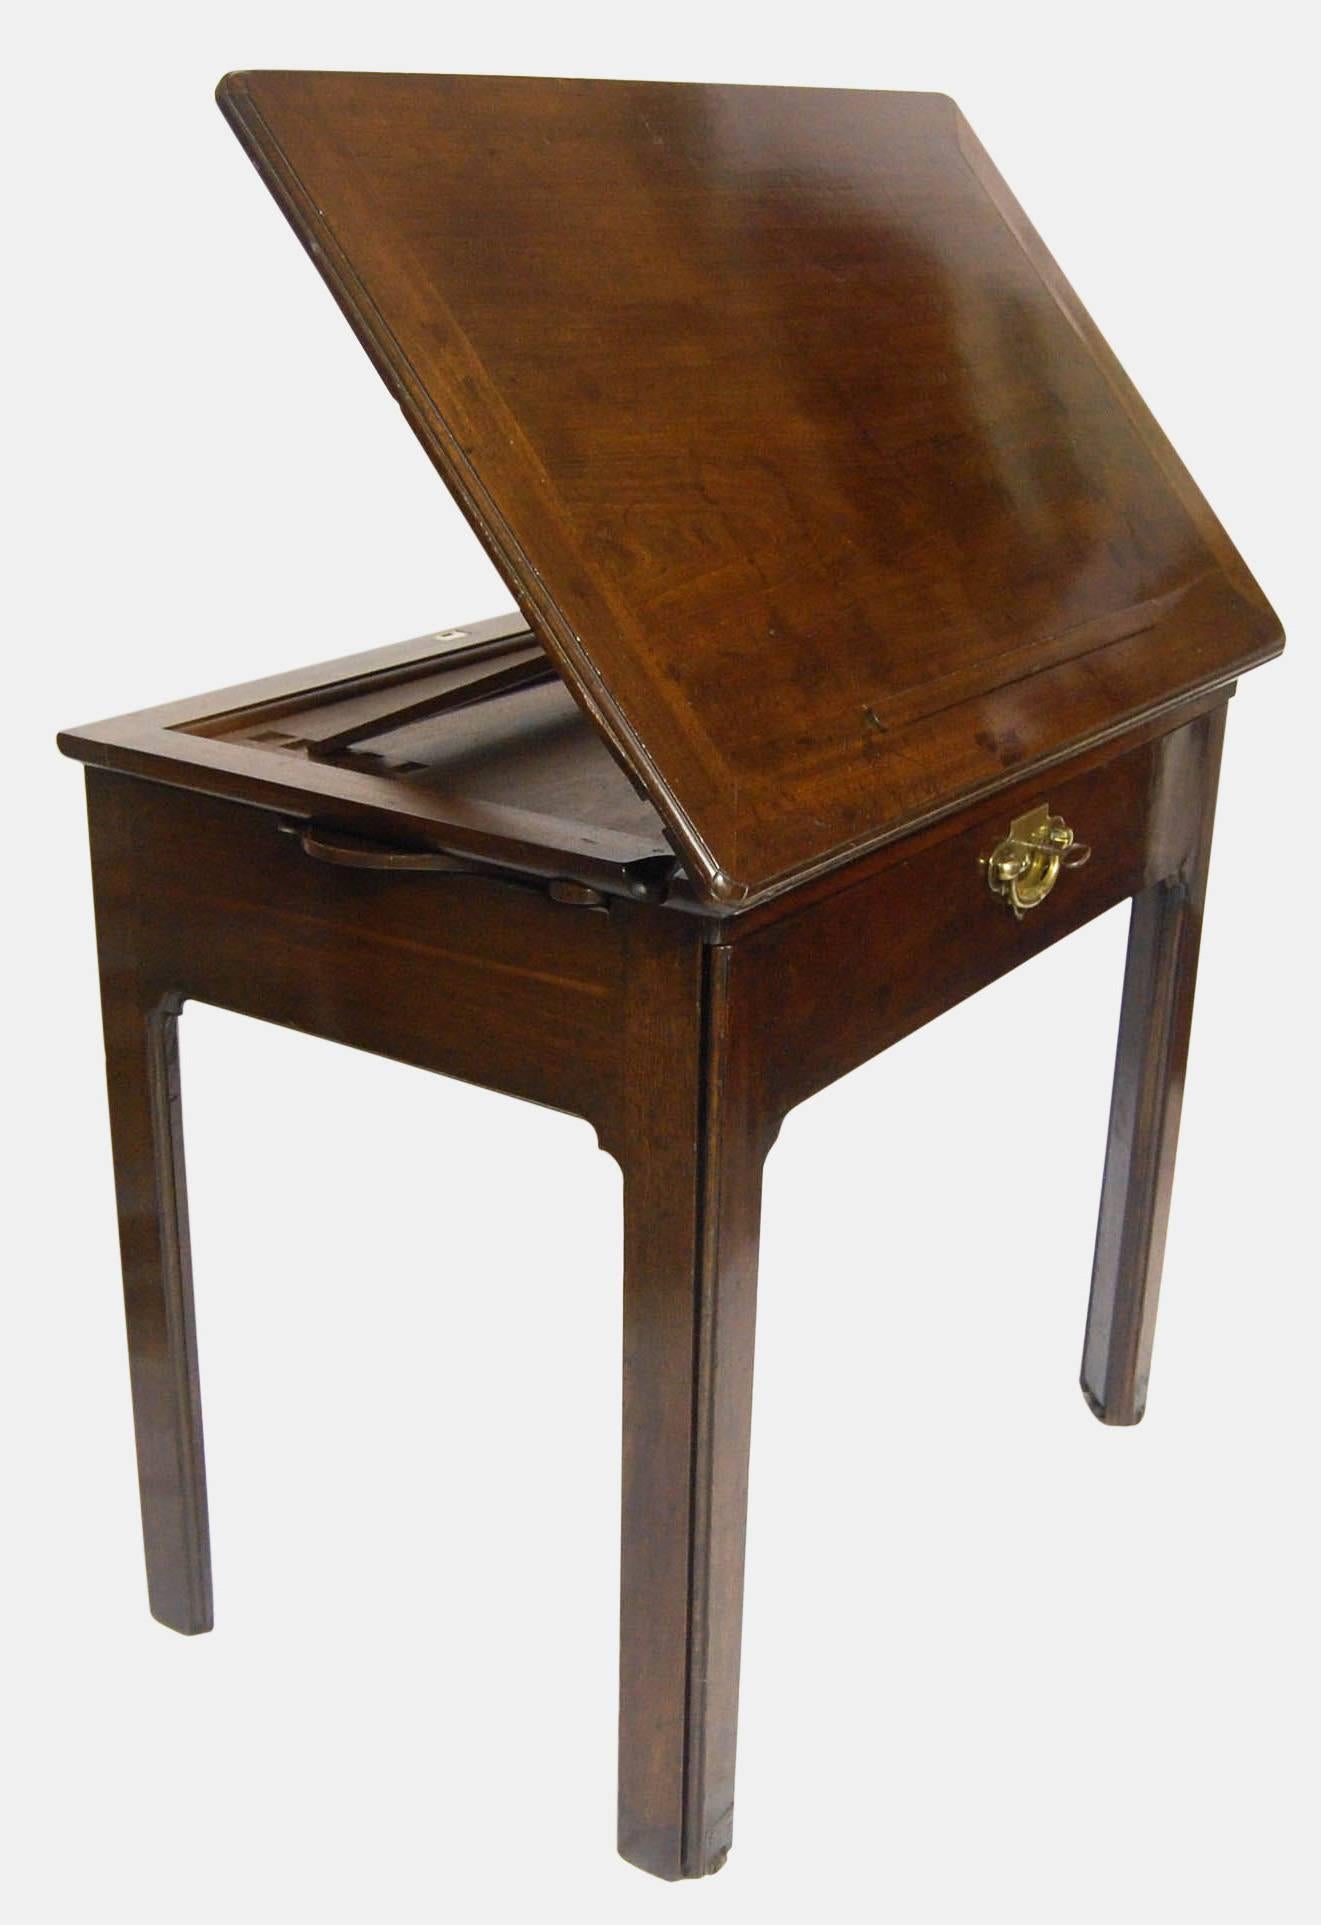 Georgian mahogany architects table with candle stands and drawers slides.

The top has a single ratchet to the base and book rest mechanism that extends from the front by means of two slides to the underside and retains it catch mechanism for